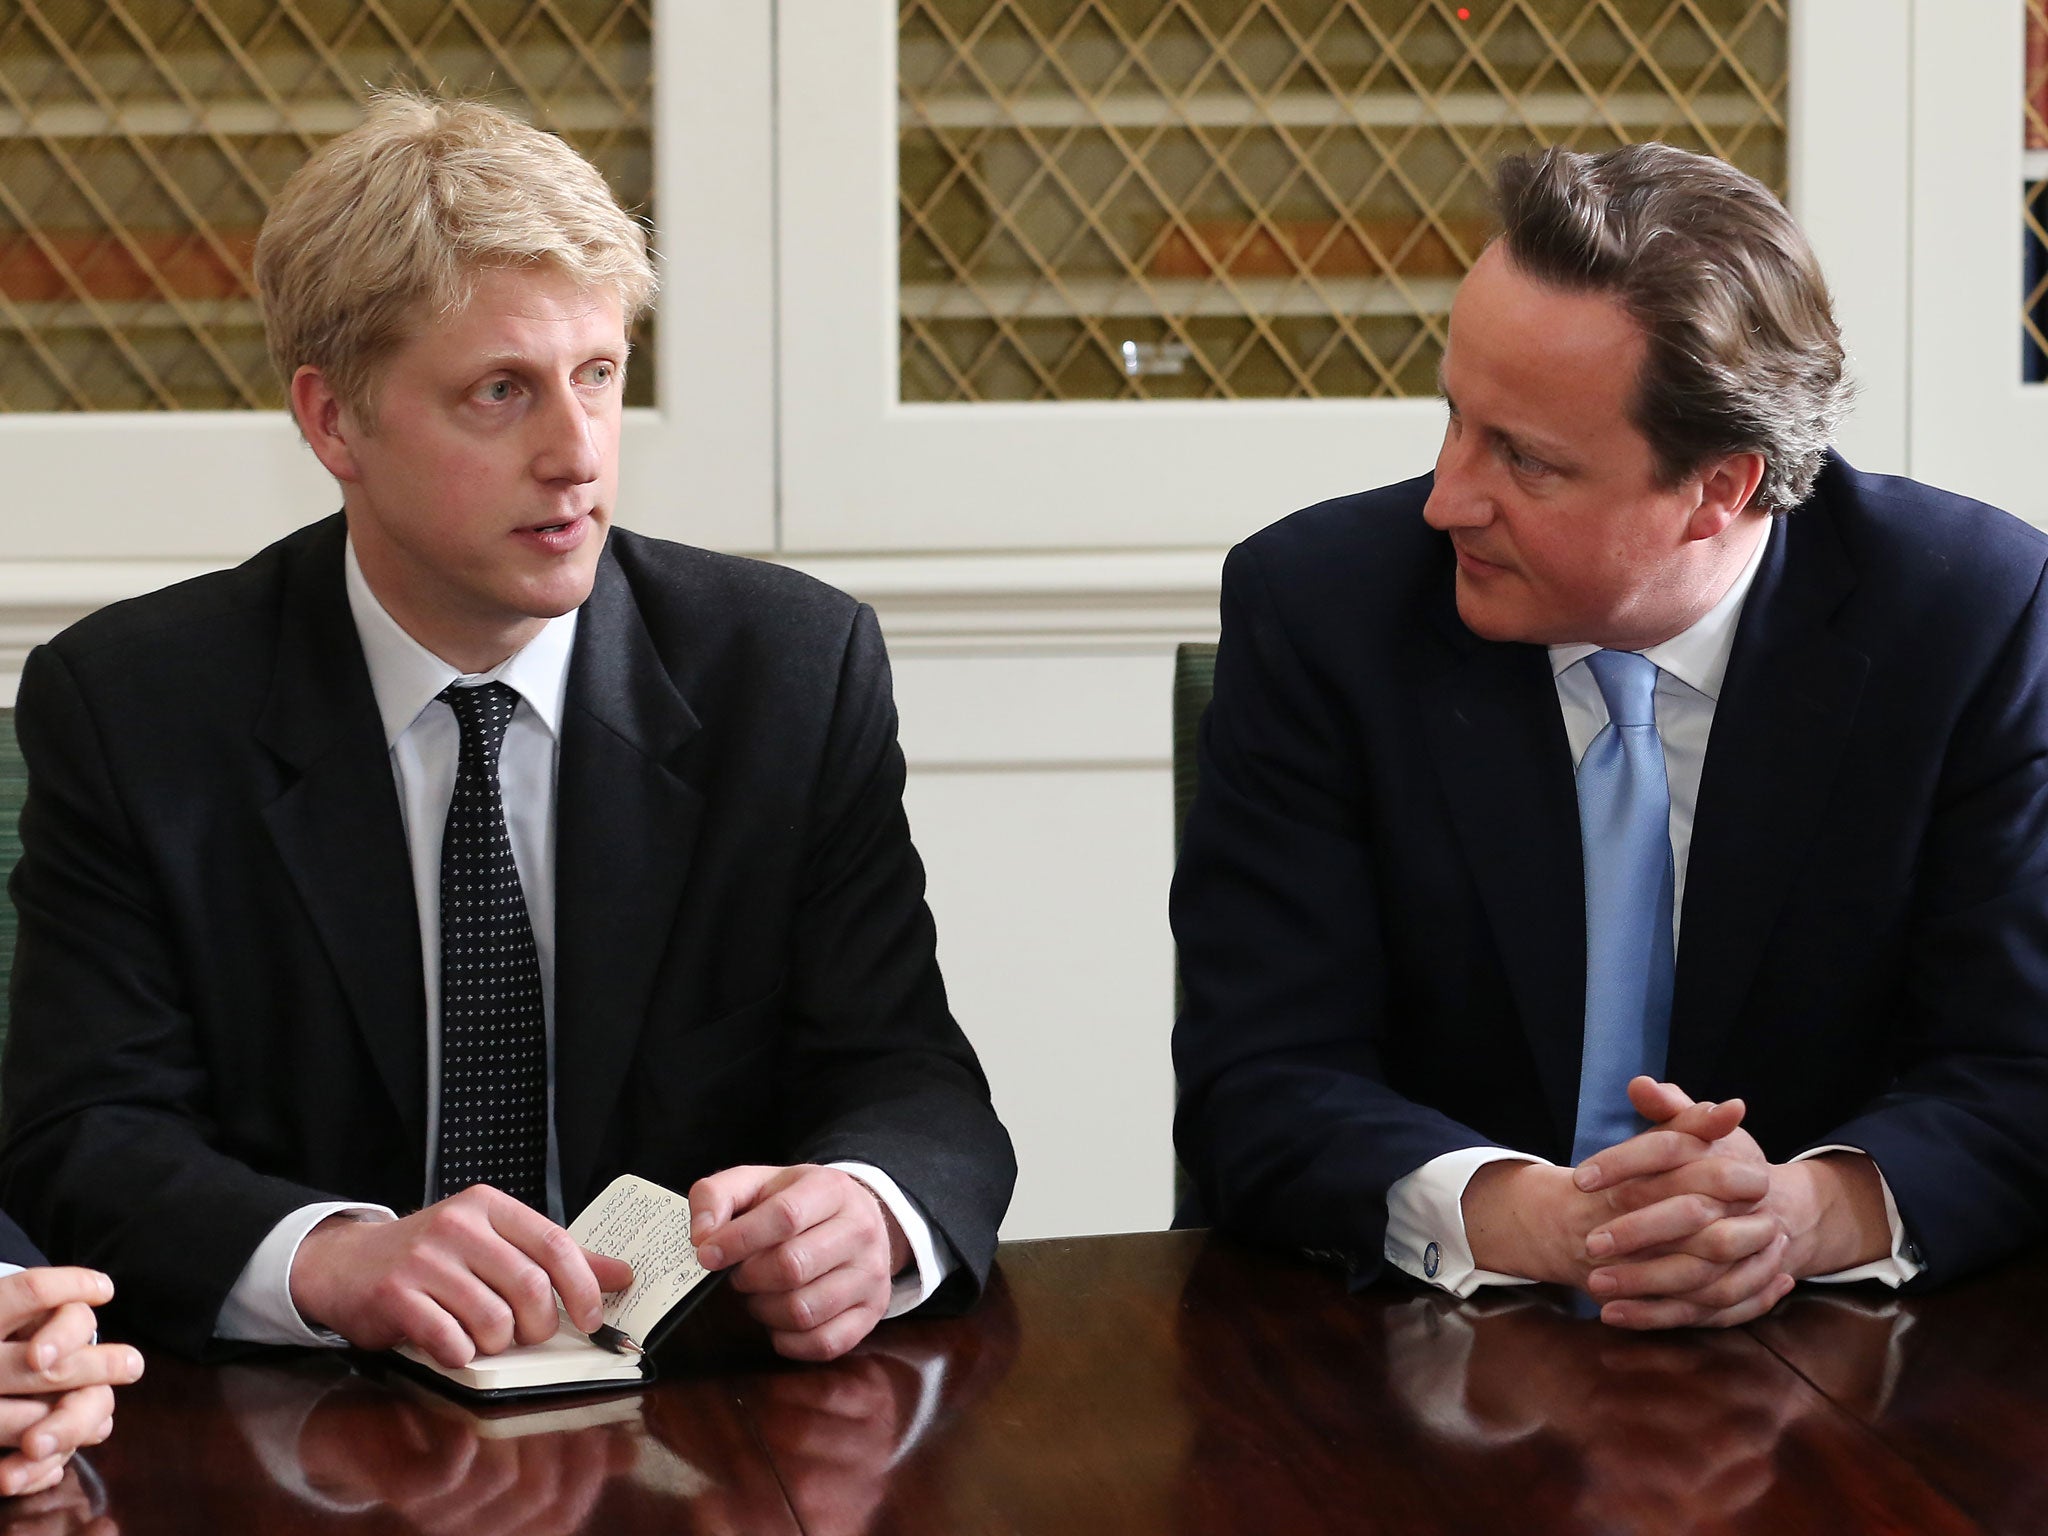 Smart, likable Jo Johnson may well be the best man for the job